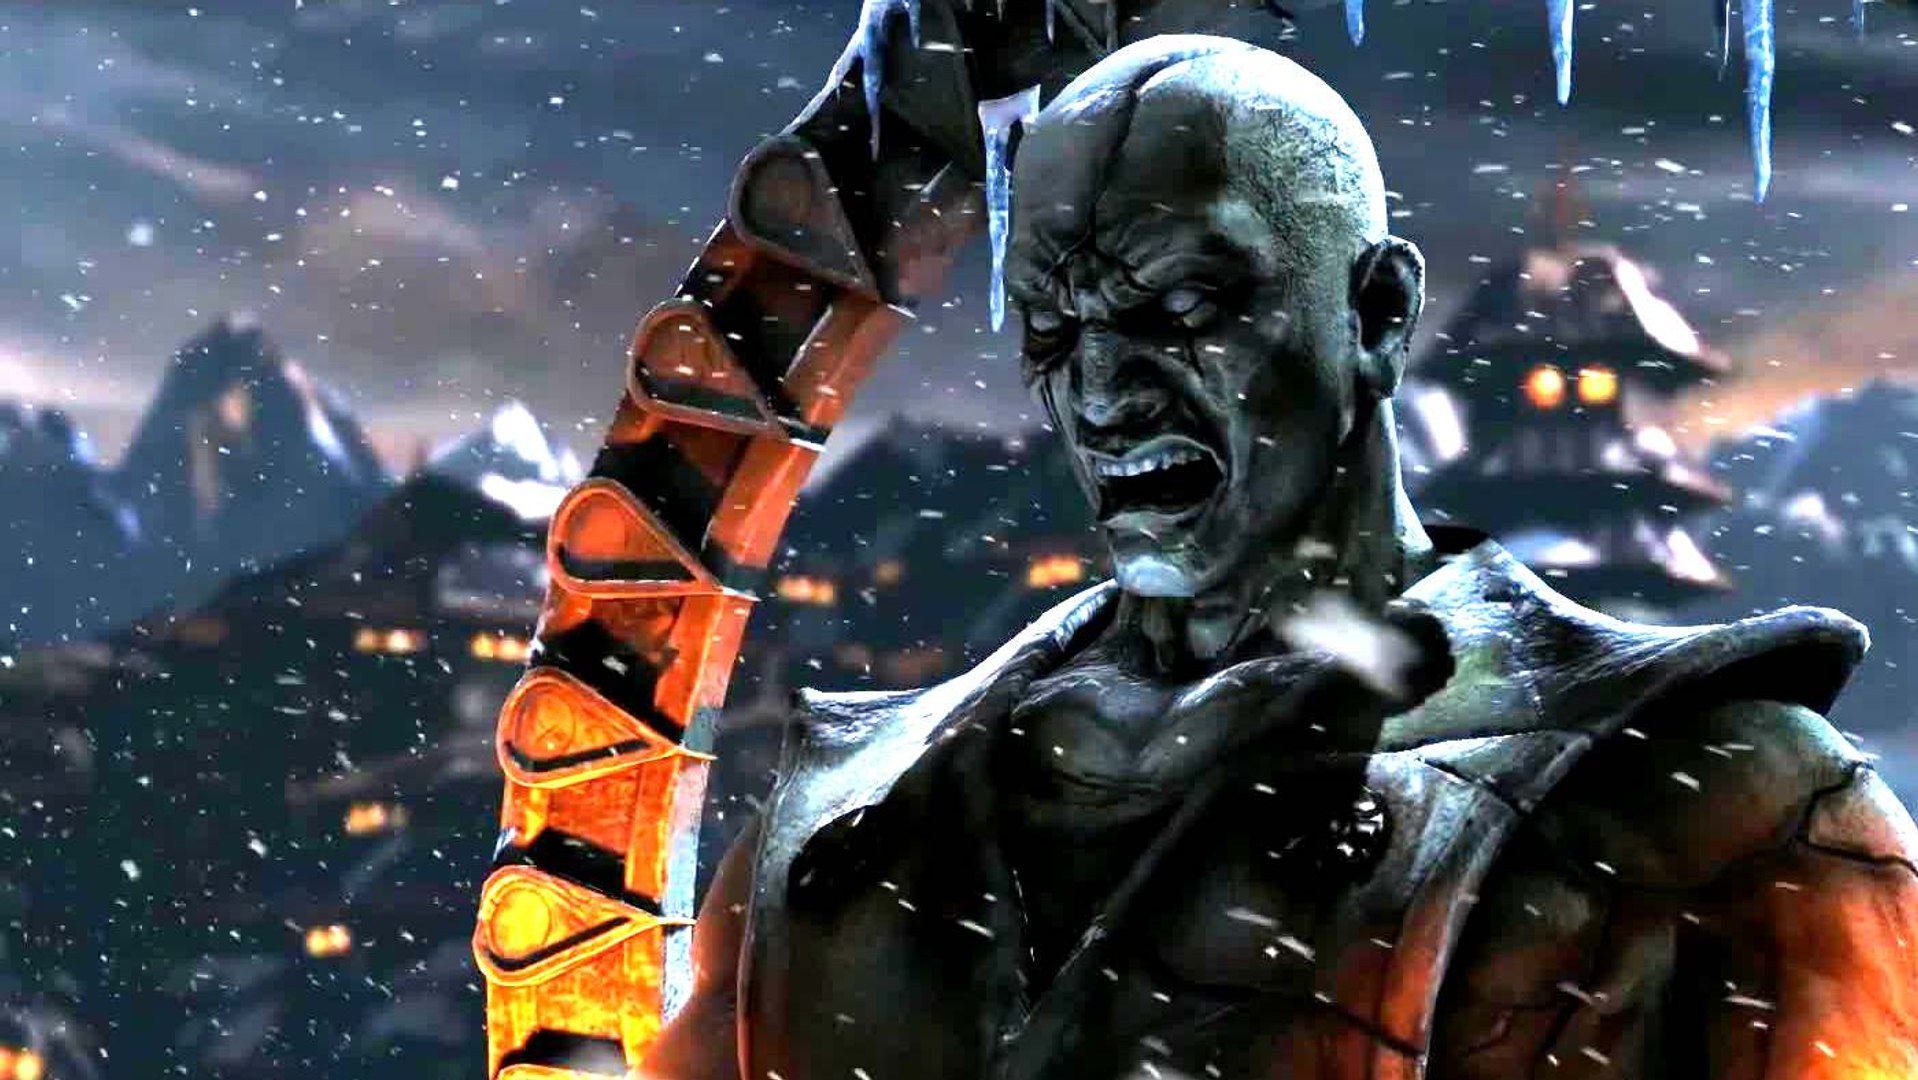 Mortal Kombat X Story Trailer - Official (Xbox One) Game 2015